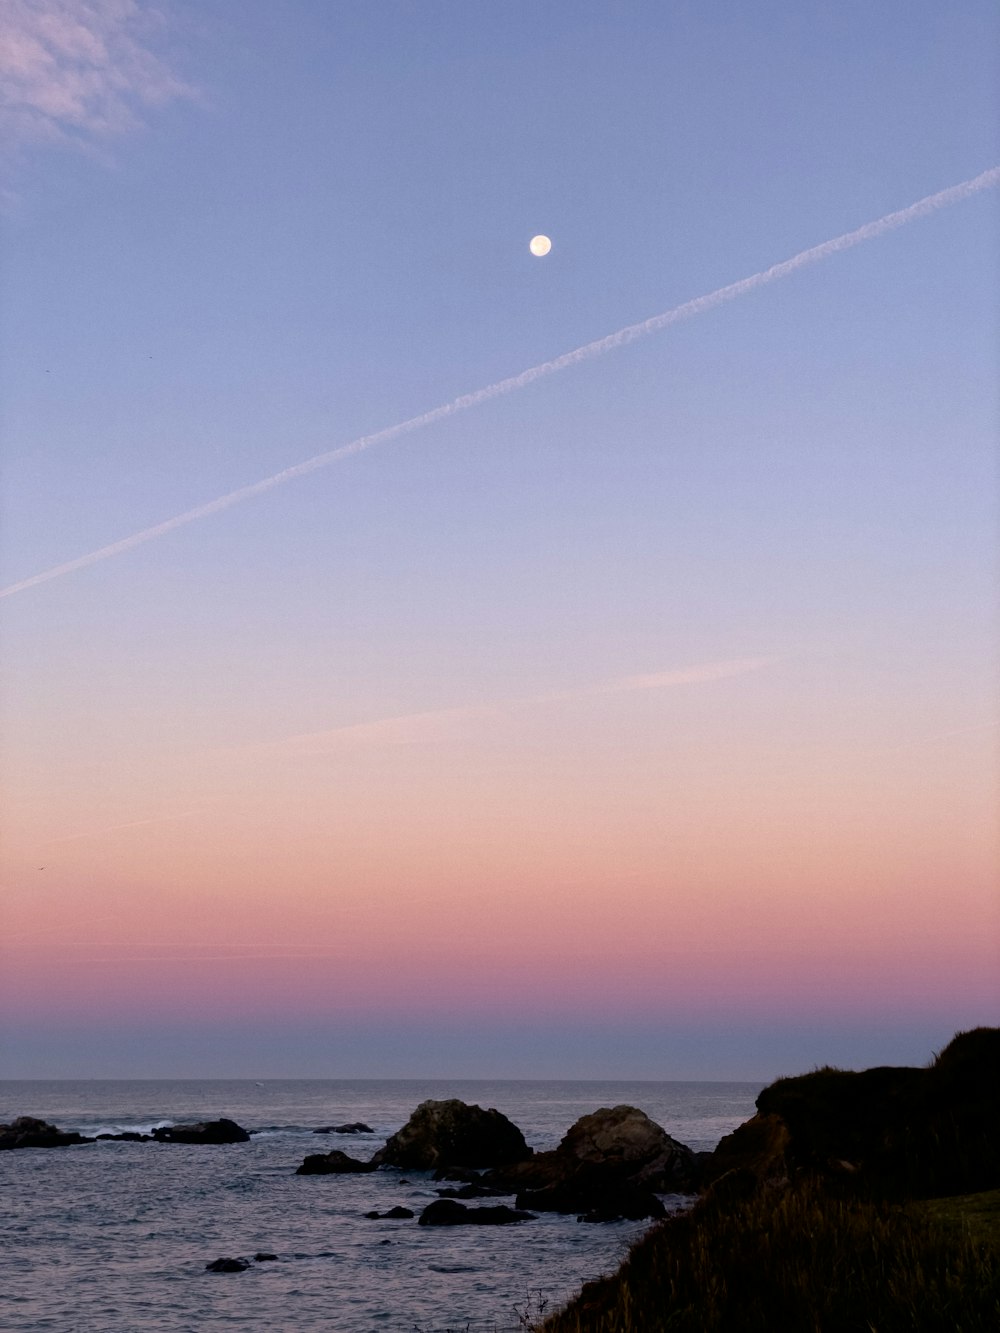 the moon is setting over the ocean and rocks